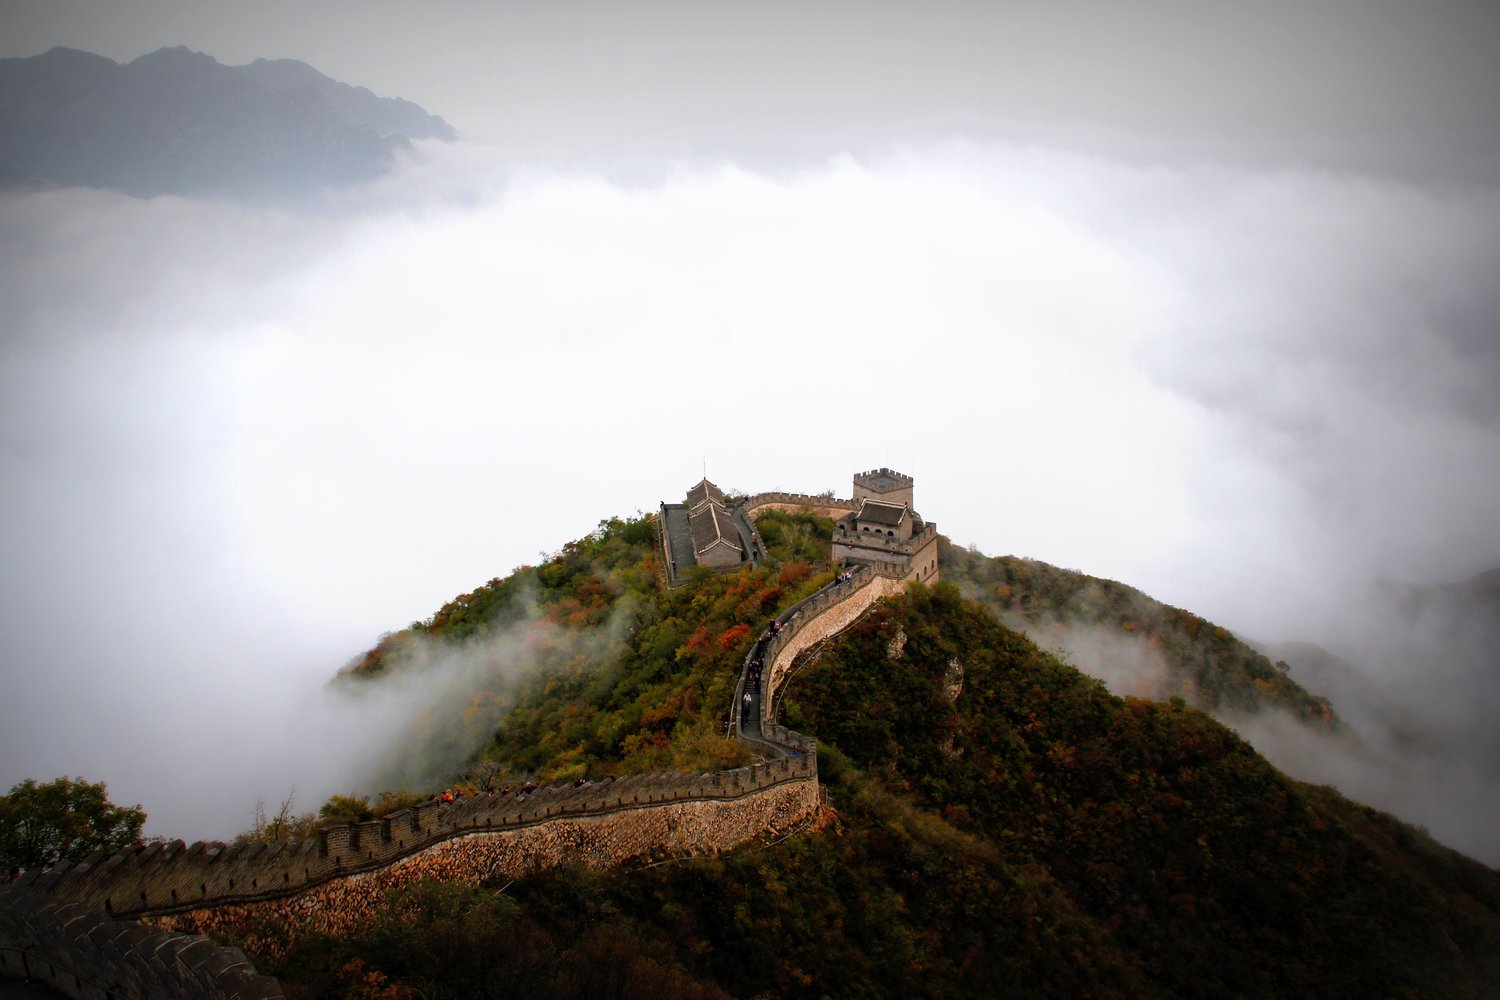 While China is known for its beautiful vistas such as this and its incredible history and culture, Katy Times reader Wendy Yang says there are issues in China which she is glad Texas' state government has condemned.